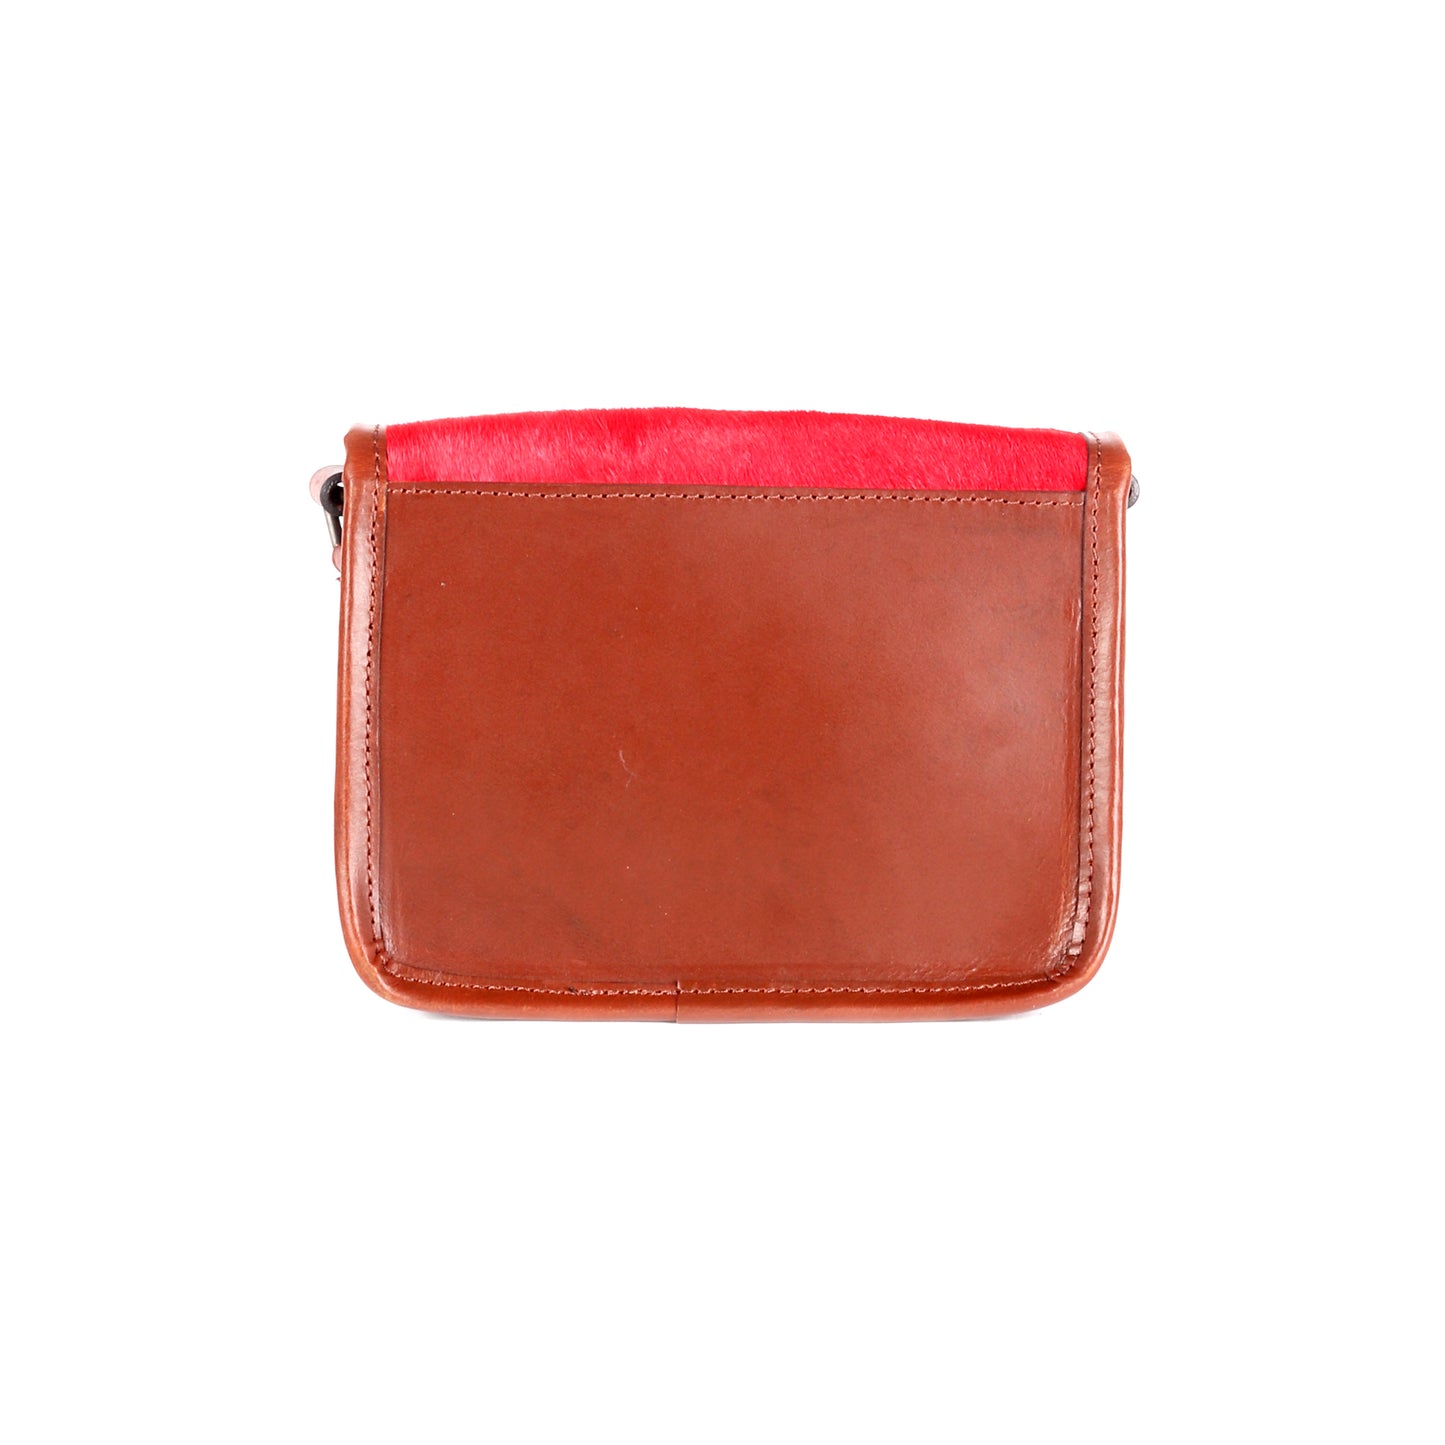 Martian Red Hair-On Leather Satchel